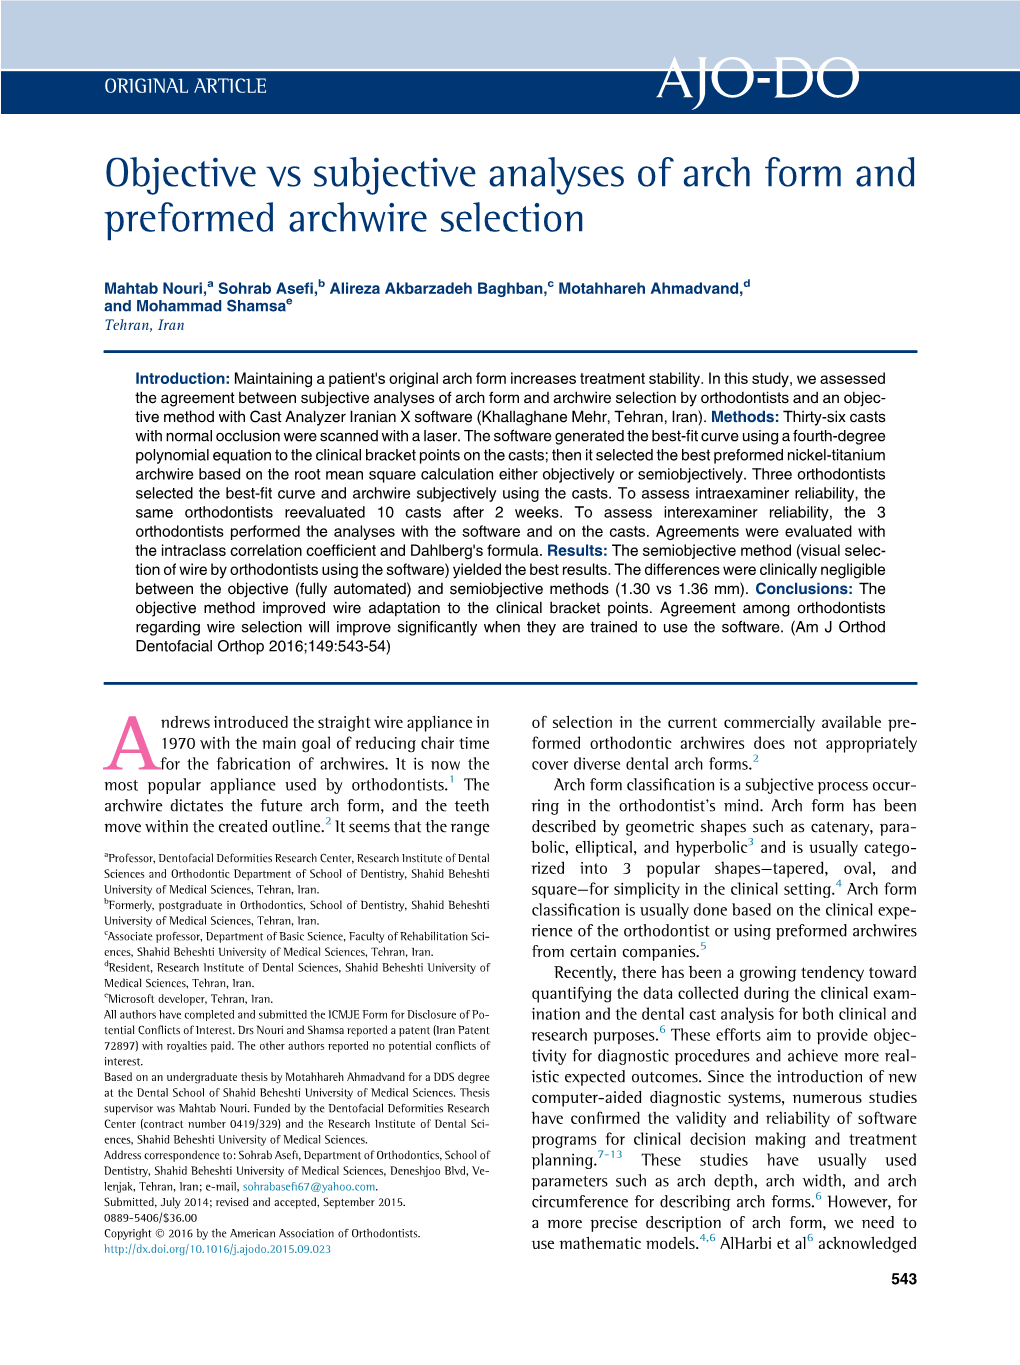 Objective Vs Subjective Analyses of Arch Form and Preformed Archwire Selection